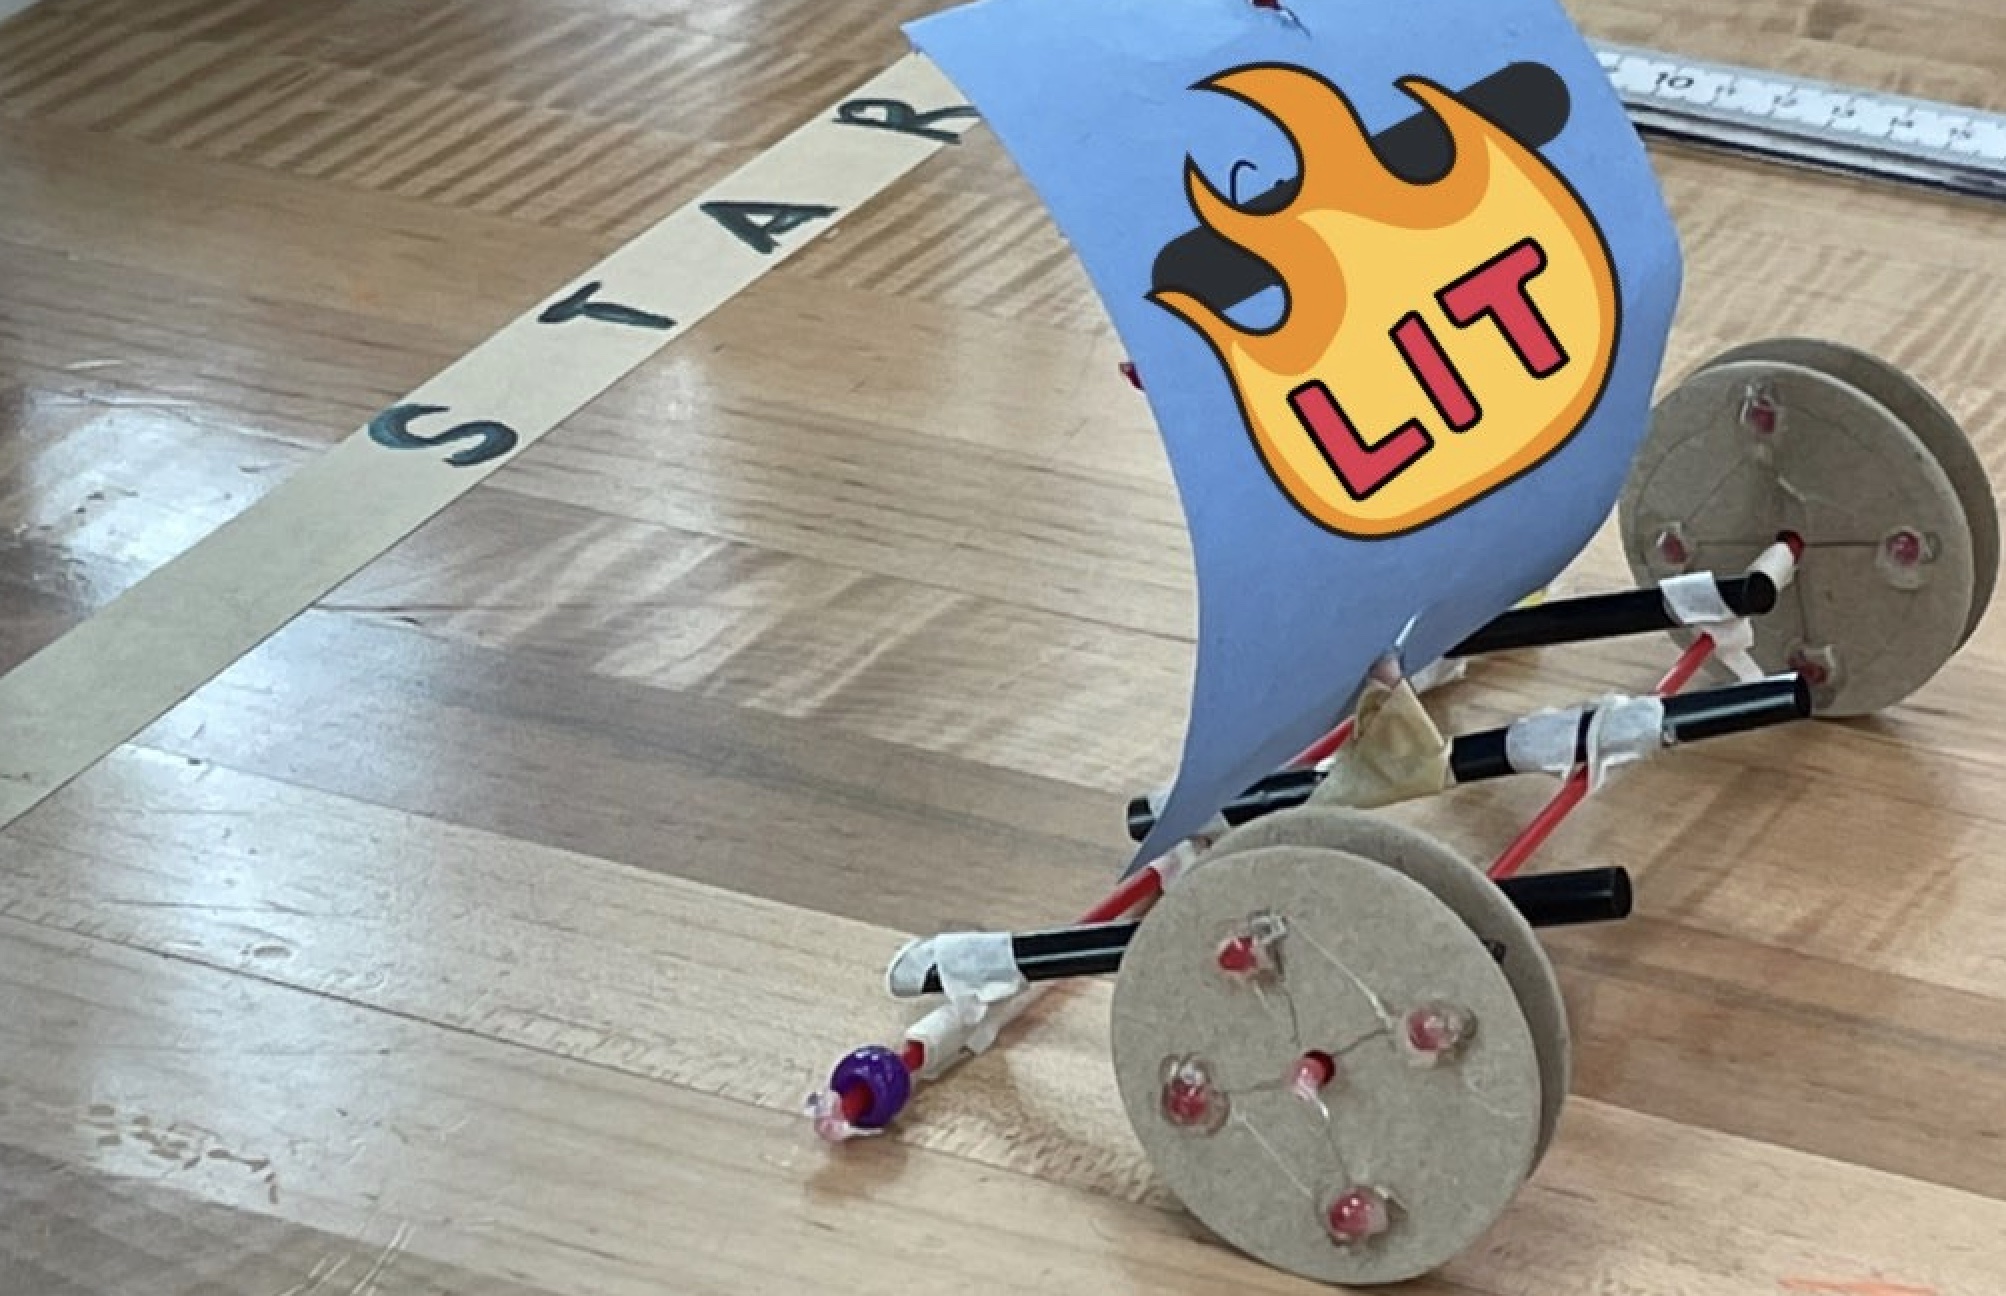 Mousetrap-Powered Car Challenge - Hands-On STEM Project